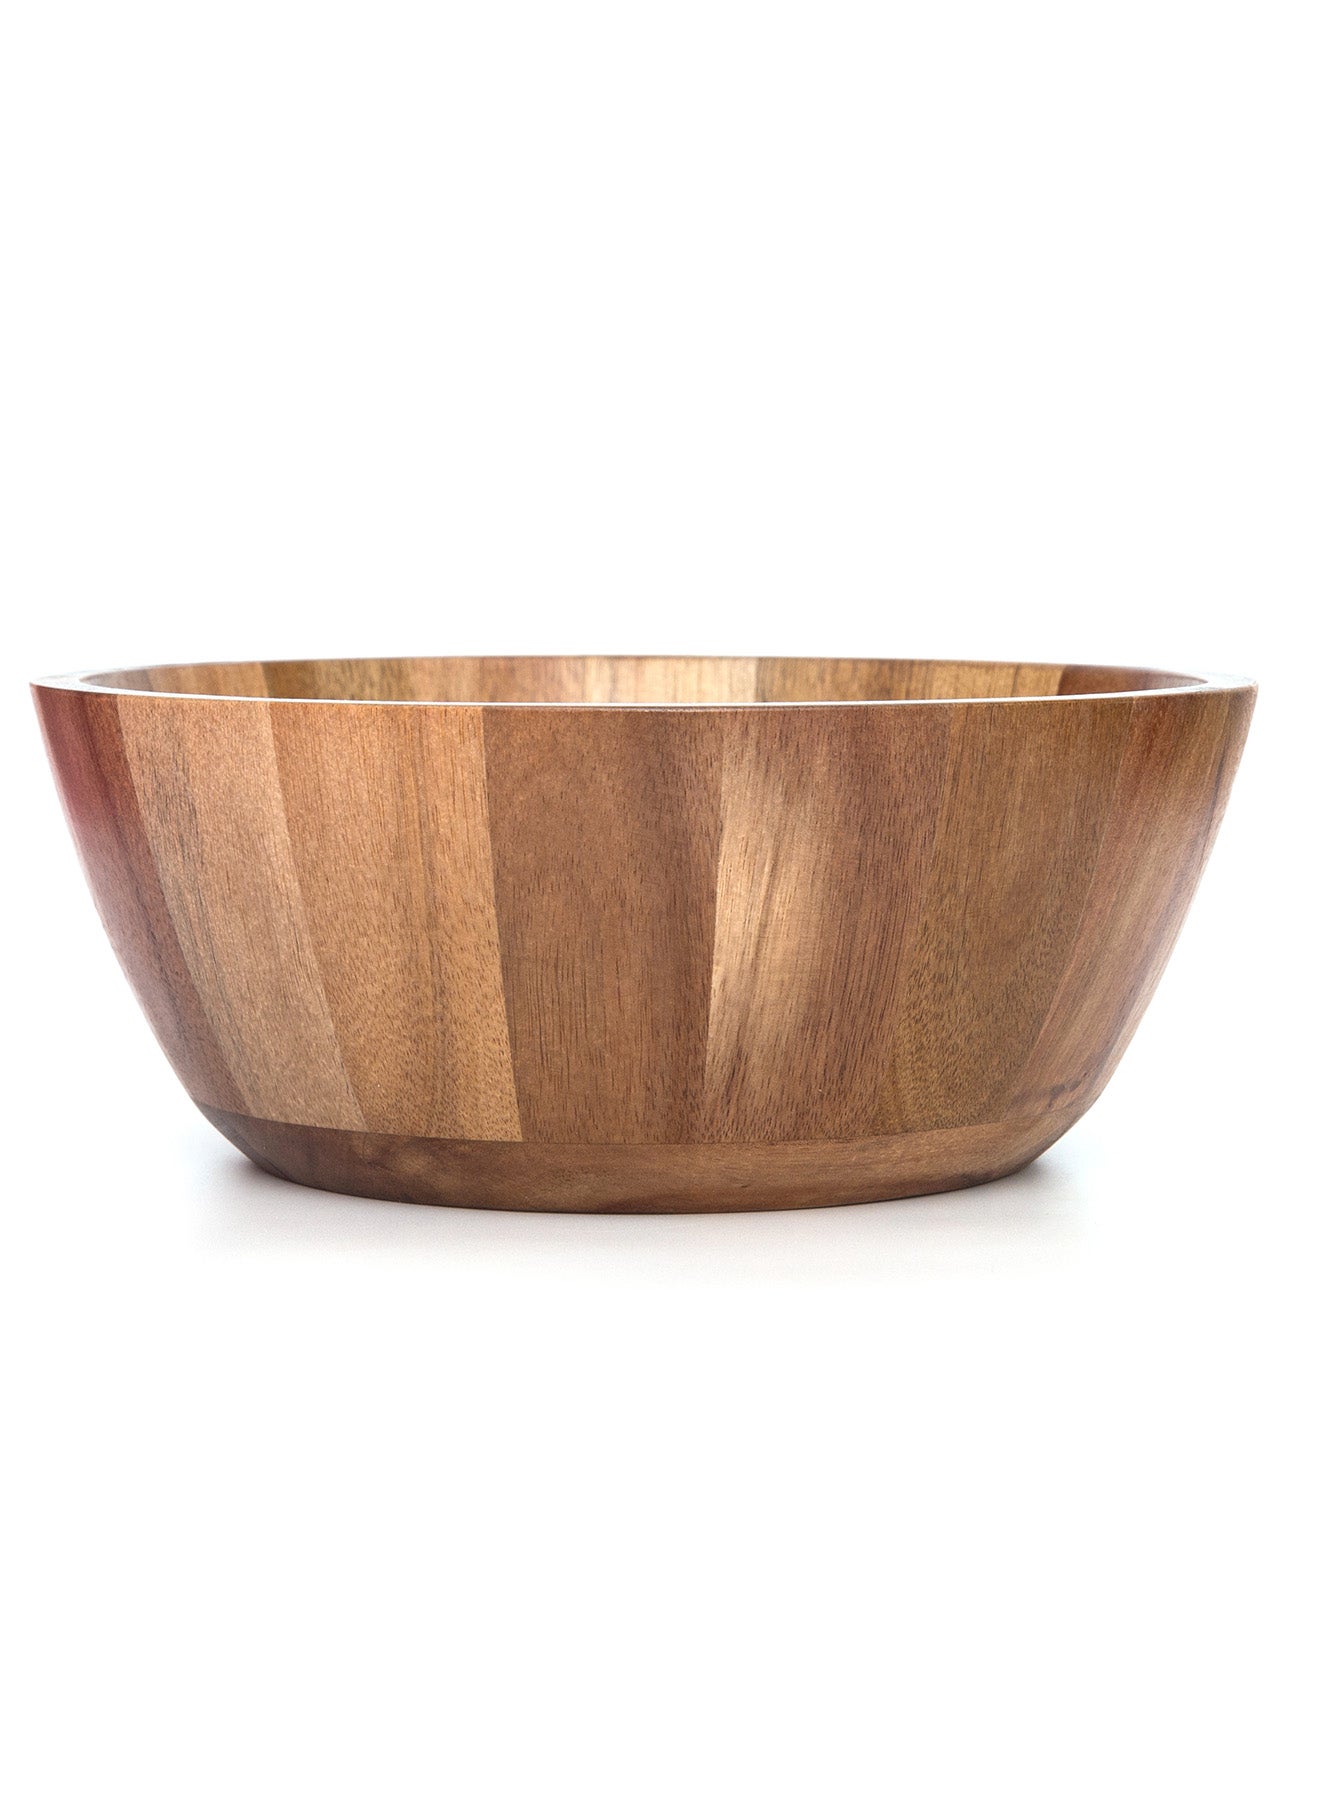 Salad Bowl - Made Of Acacia Wood - Premium Quality - Wooden Bowl - Serving Dishes - By Noon East - Dark Brown 